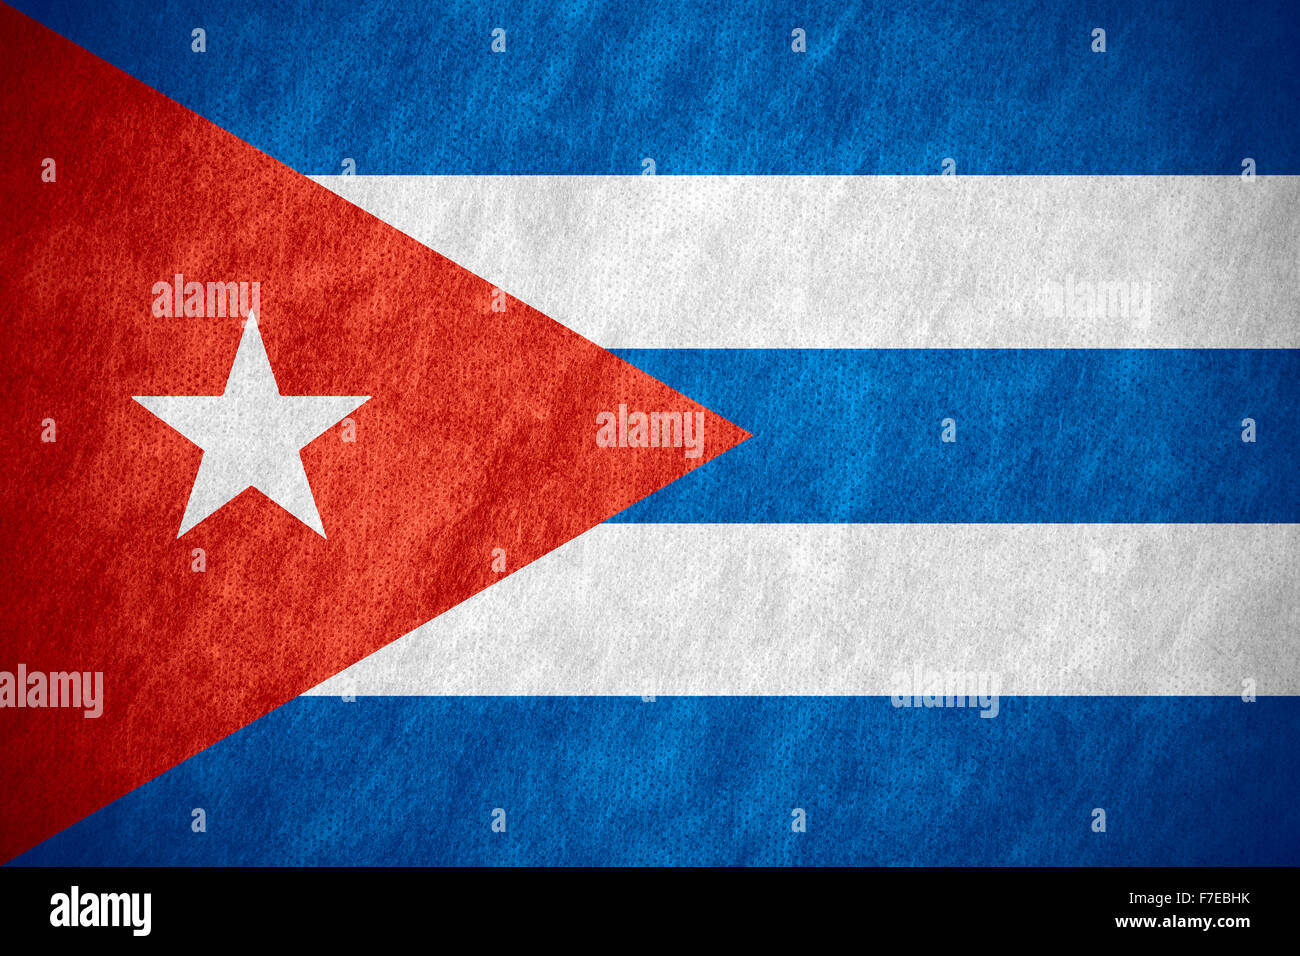 flag of Cuba or banner on canvas texture Stock Photo